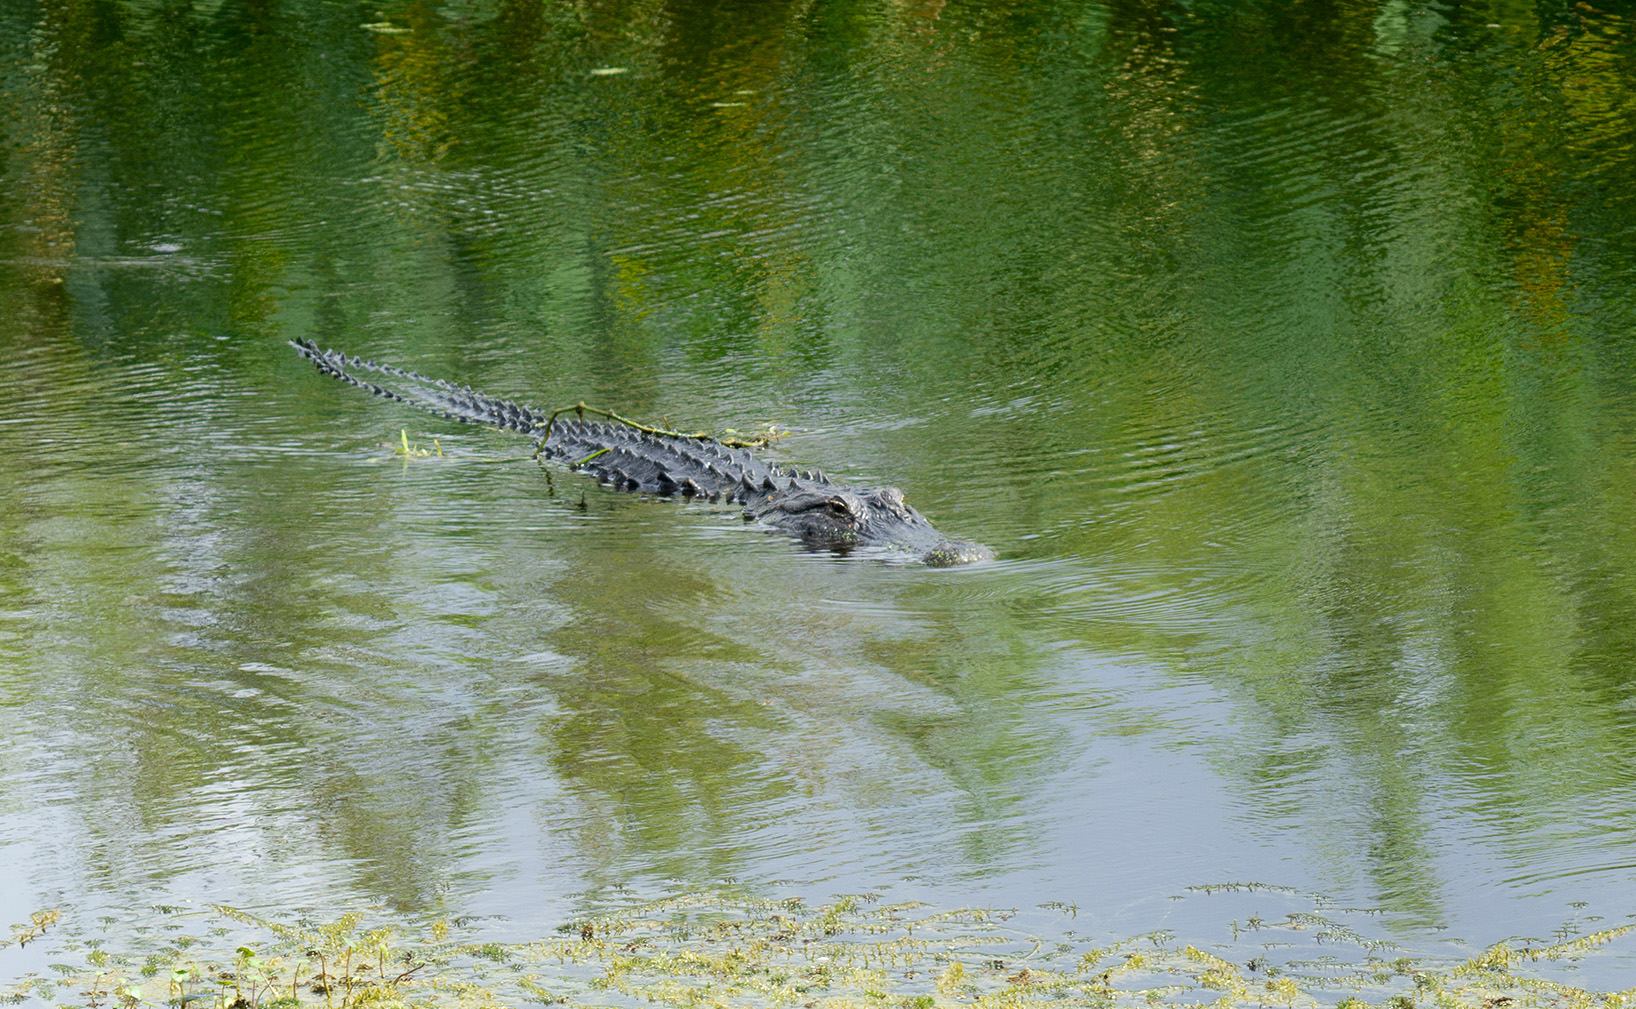 Alligator crusing along with a vine on his back